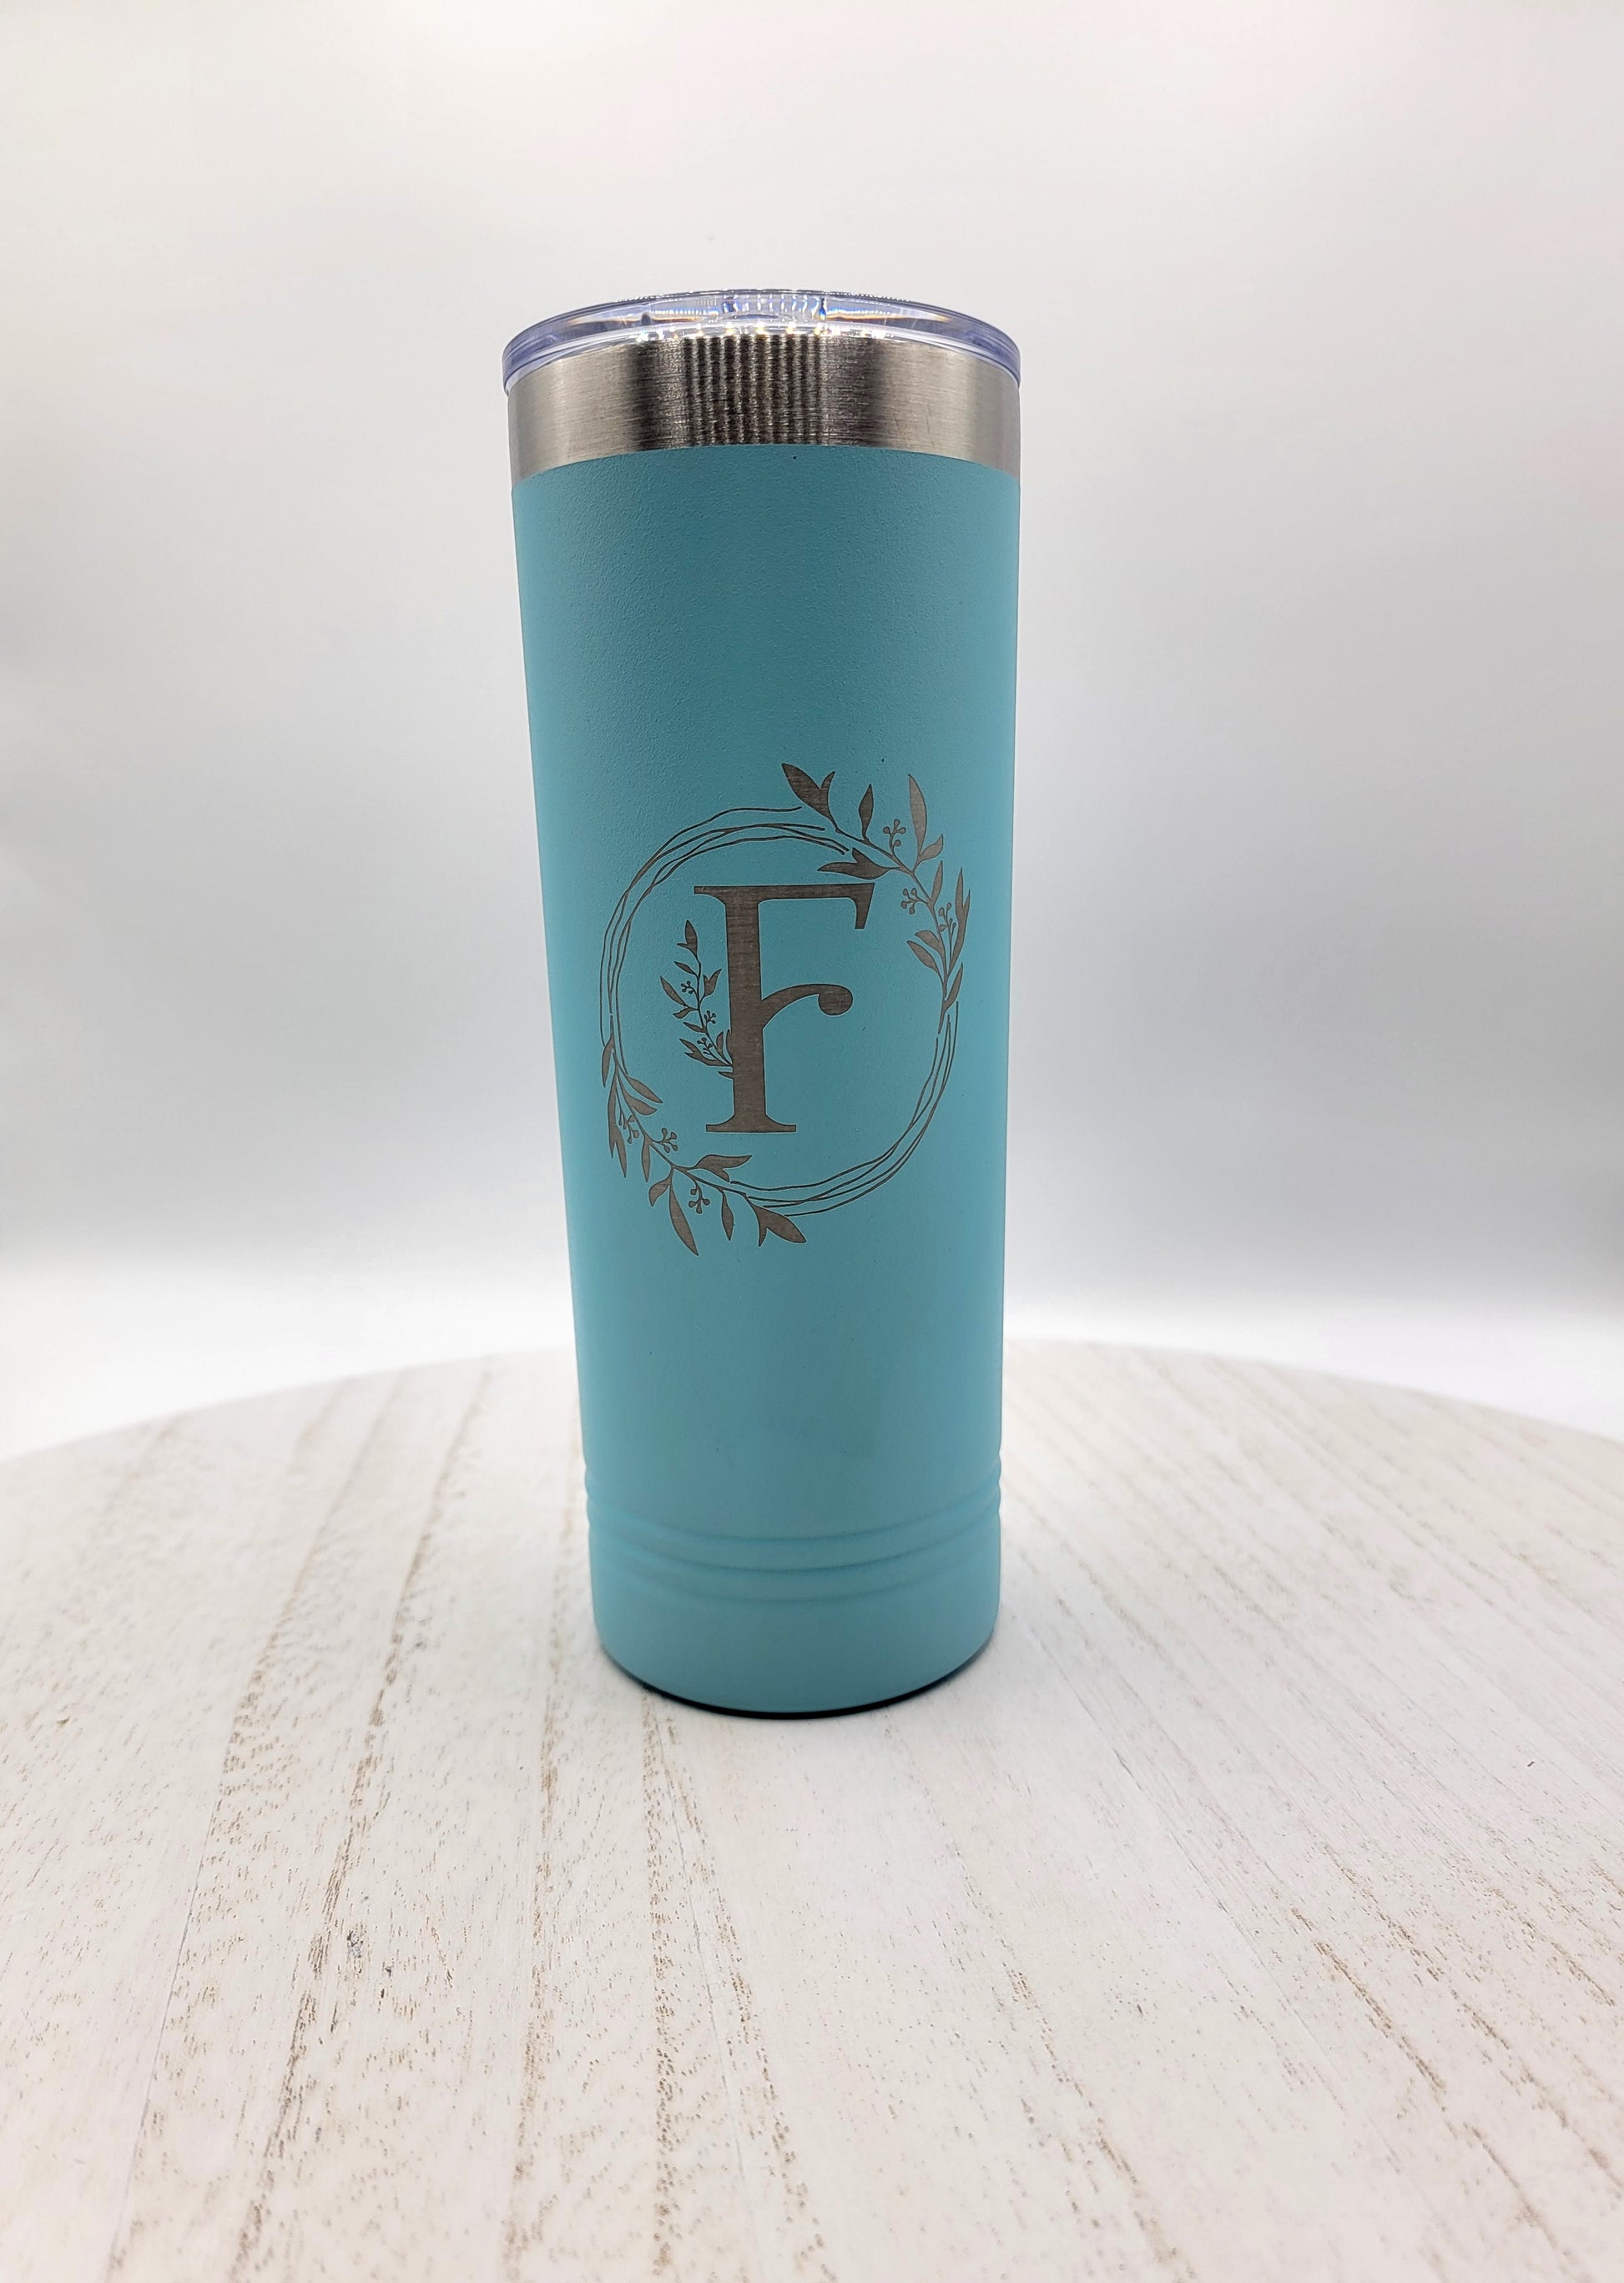 Teal skinny tumbler with floral wreath and letter F in silver on white background